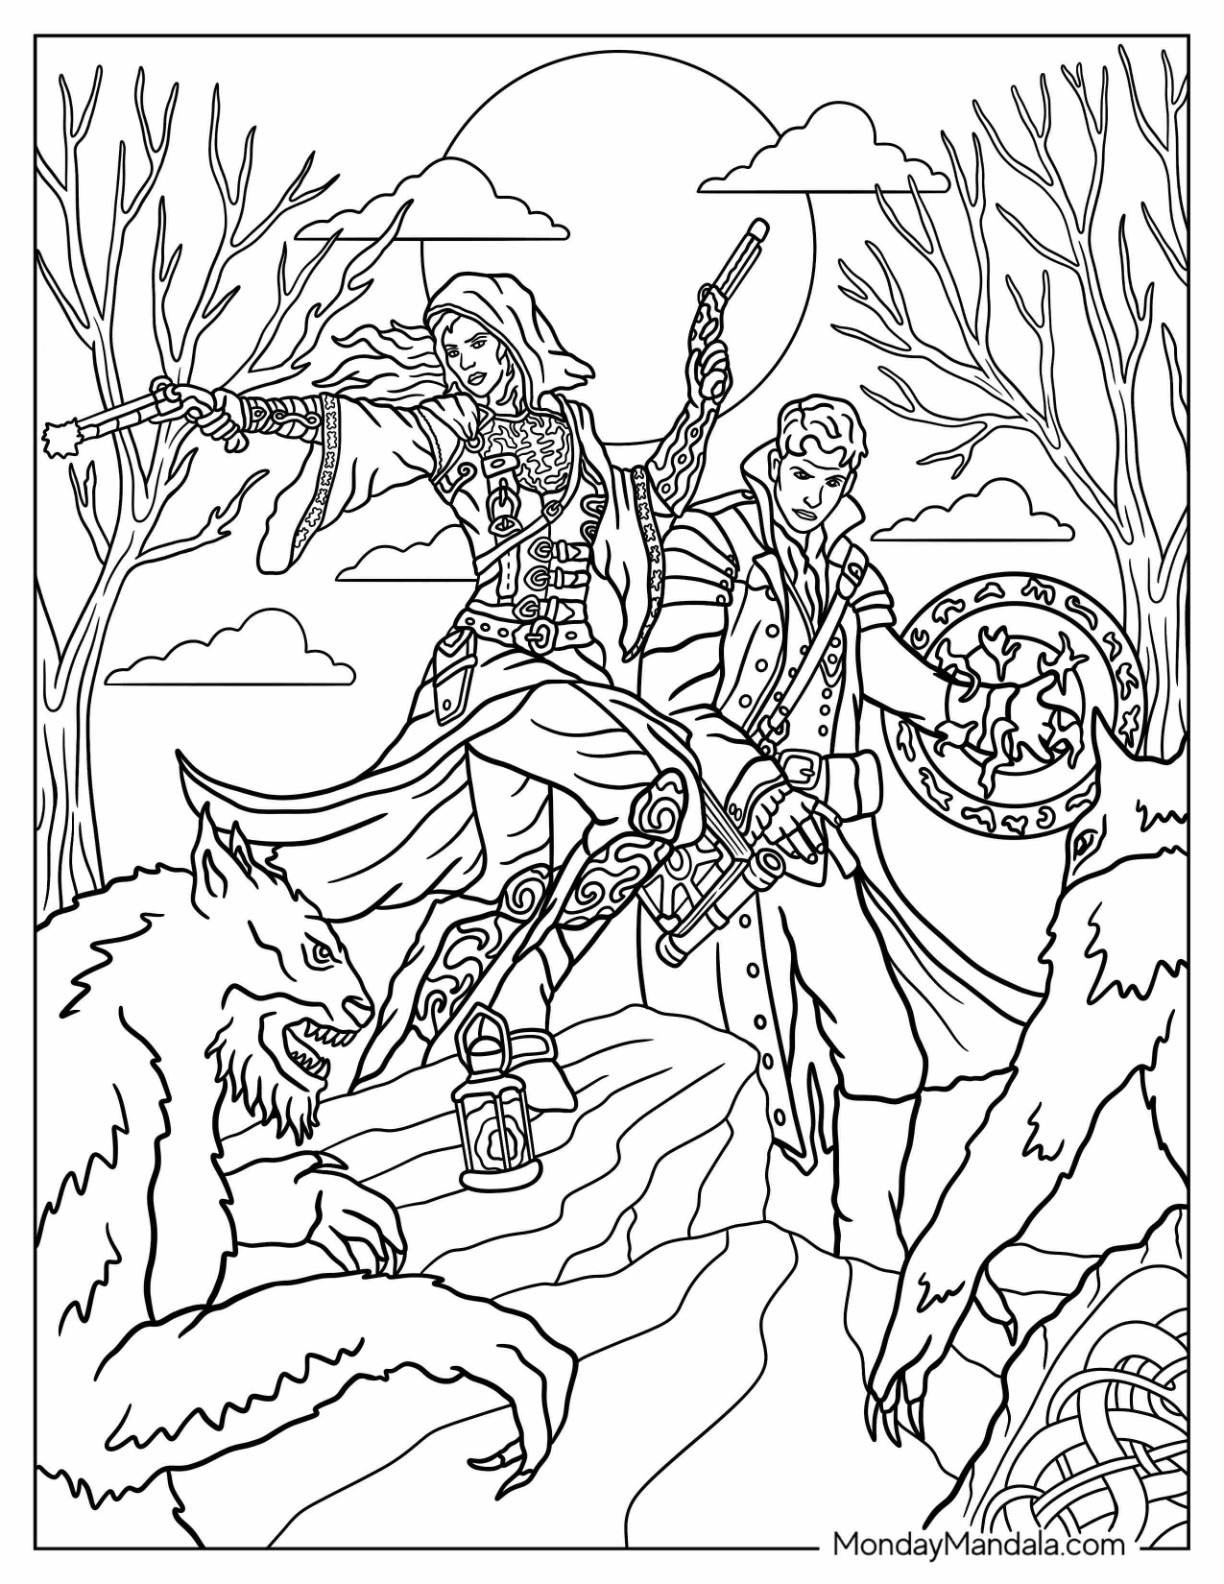 Fantasy coloring pages free pdf printables